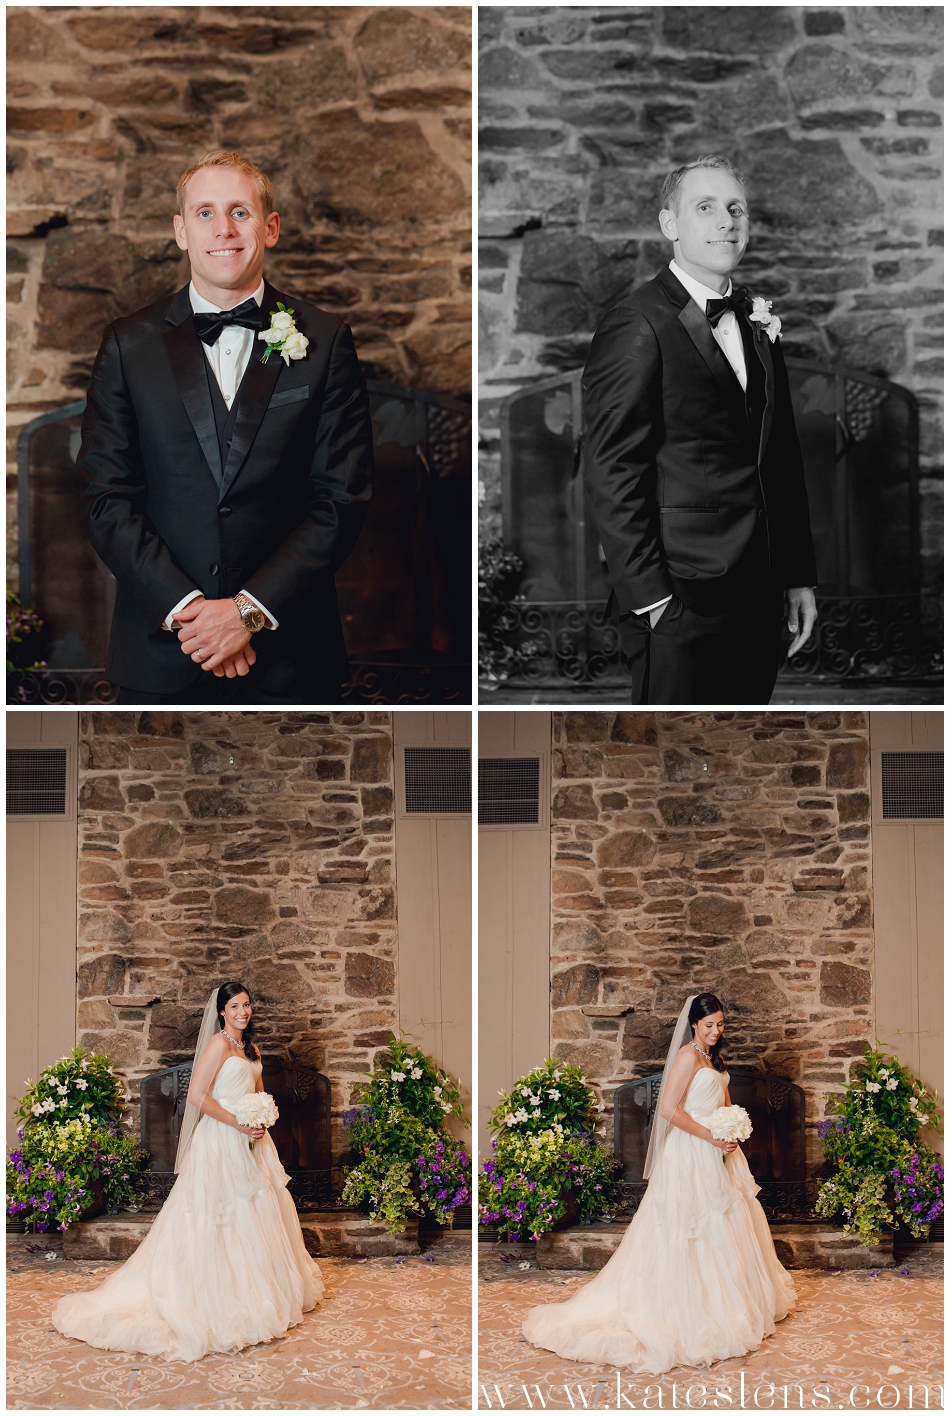 1_Kate_Timbers_Wedding_Photography_Charleston_Lowcountry_Media_Rose_Valley_Old_Mill_Pennsylvania_1420